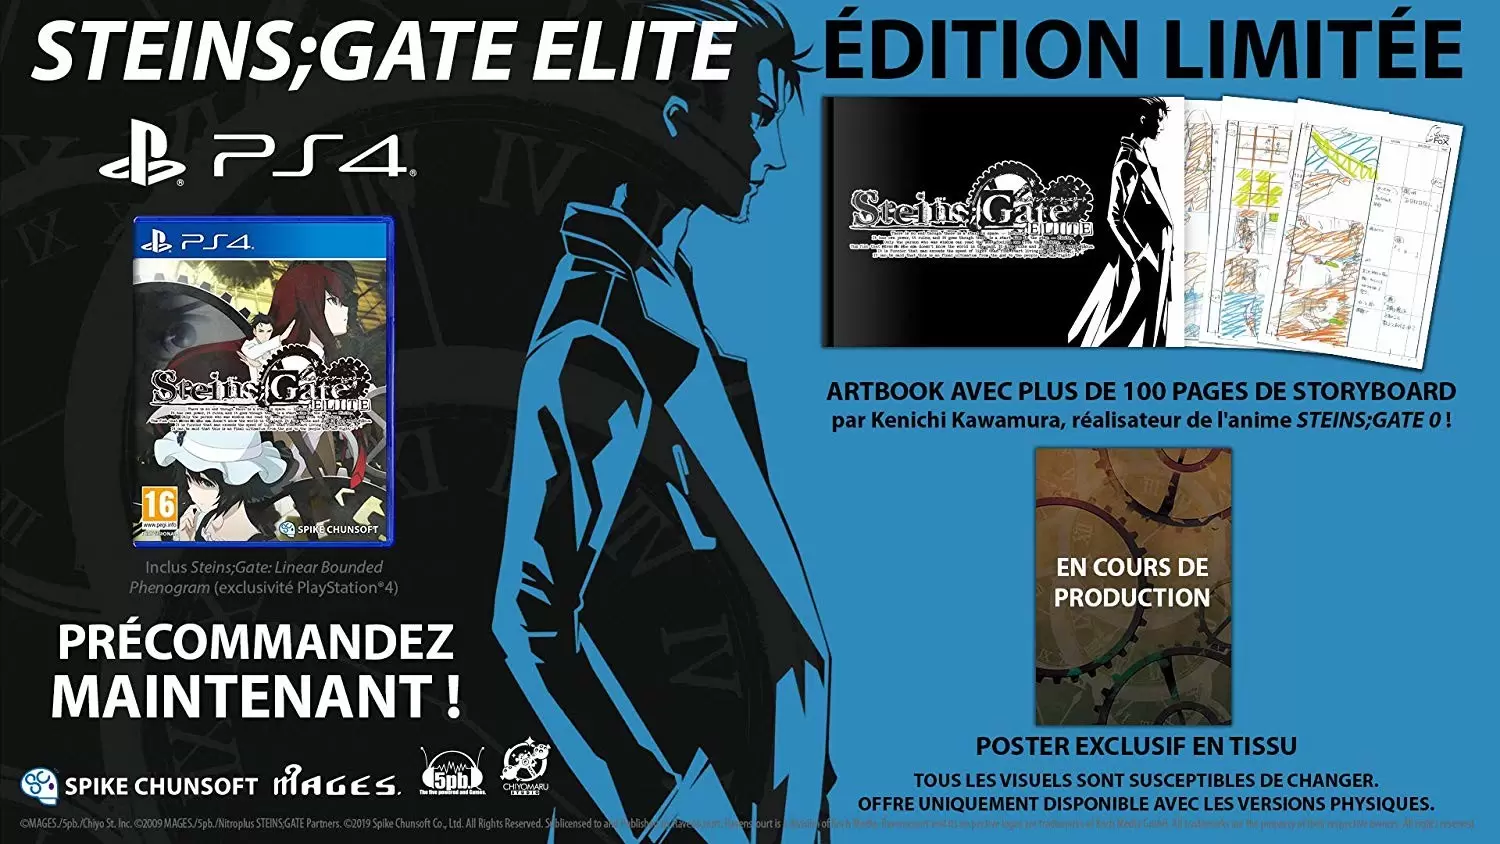 PS4 Games - Steins Gate Elite Limited Edition